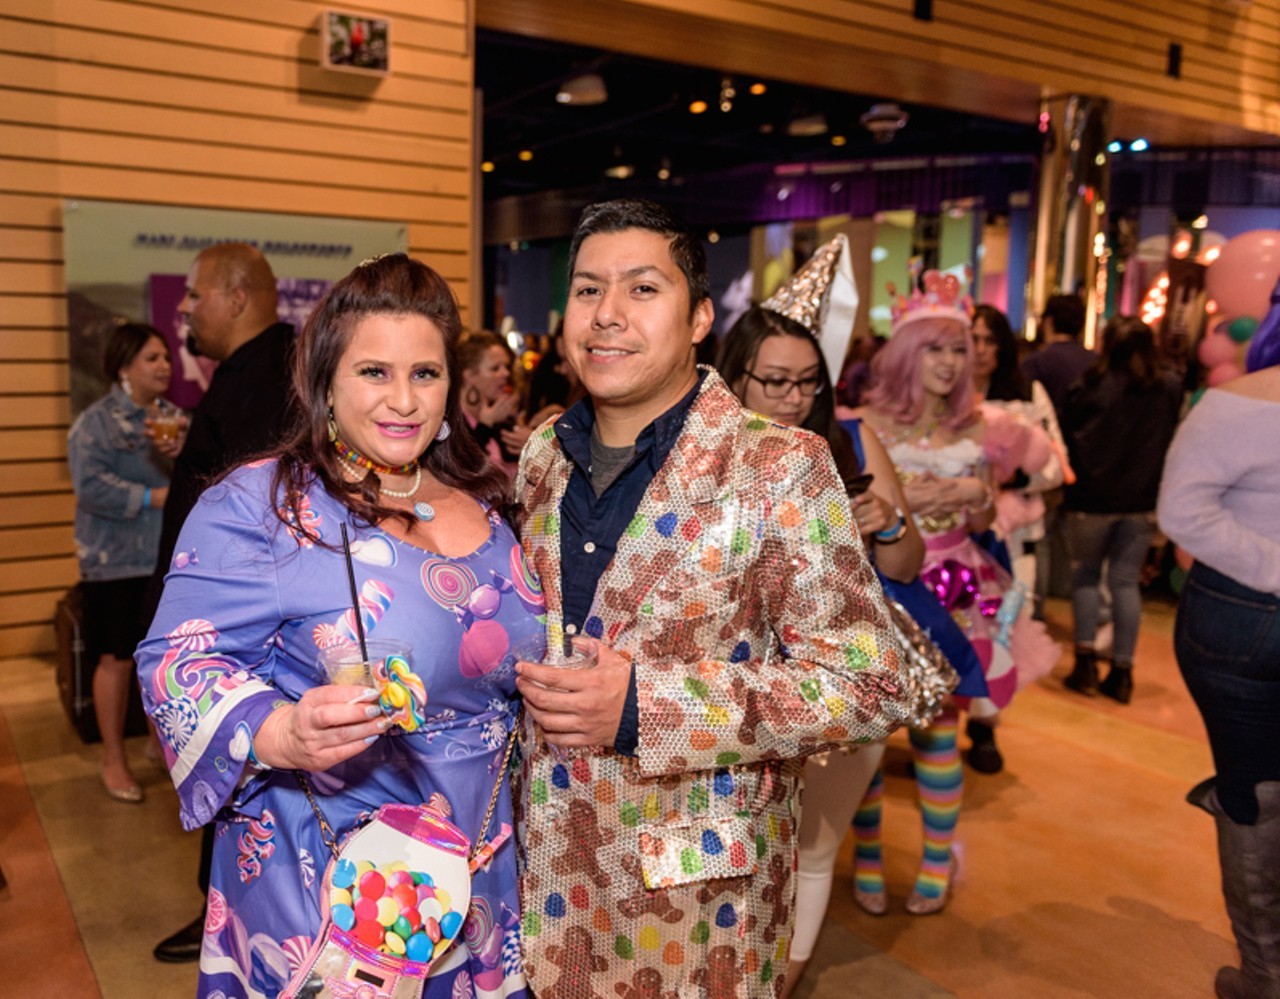 Annual sweets-and-cocktails event Dulce, benefiting San Antonio's DoSeum, returns Friday, Dec. 15